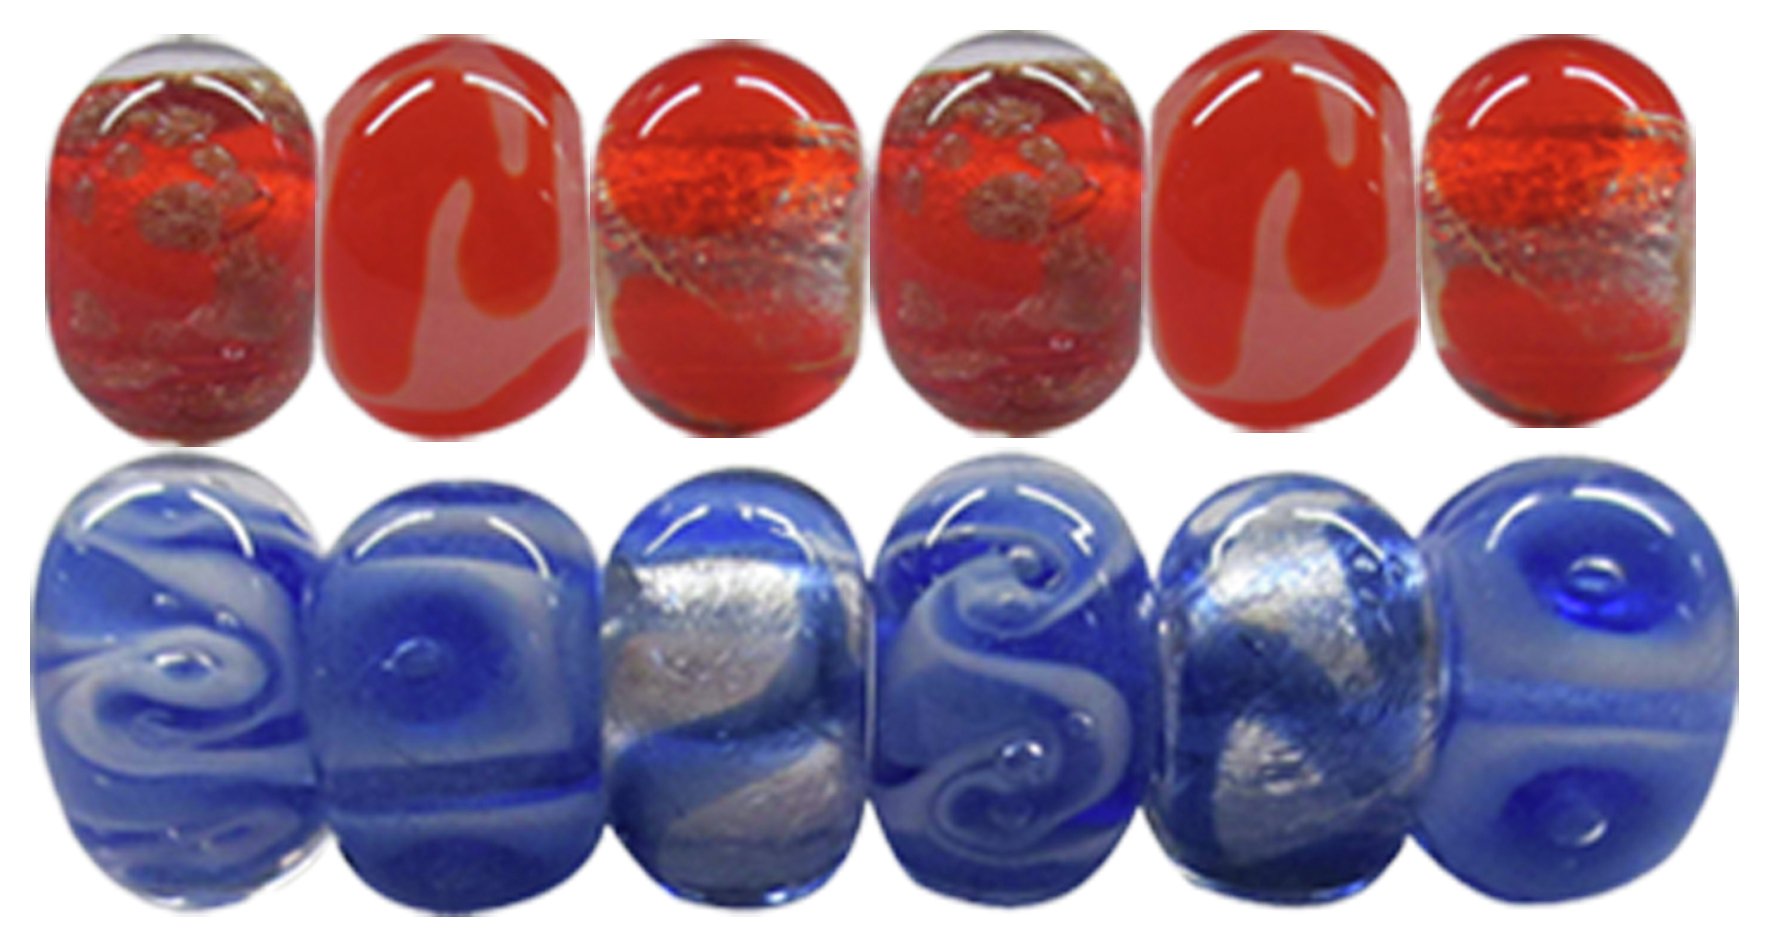 Kids Red and Blue Bead Assortment review